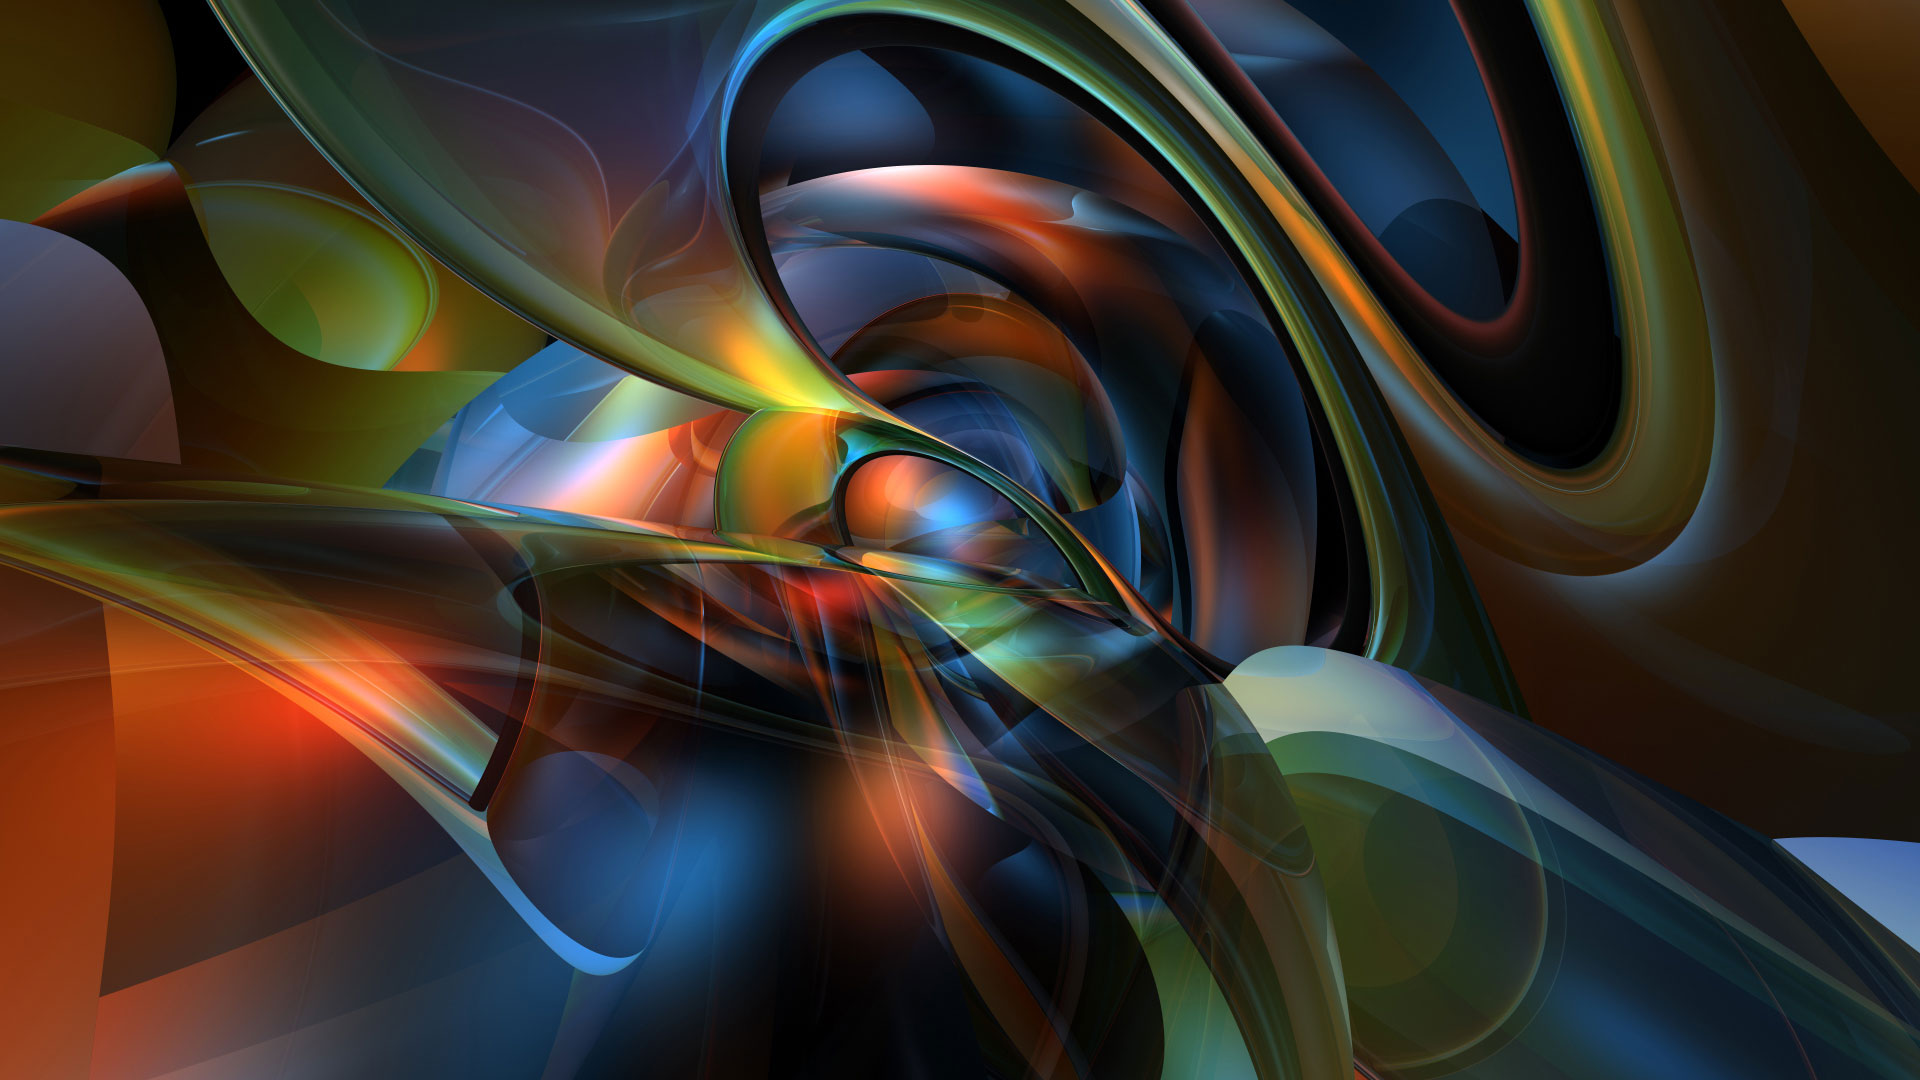 3d Abstract Wallpaper 9599 Hd Wallpapers in 3D   Imagescicom 1920x1080